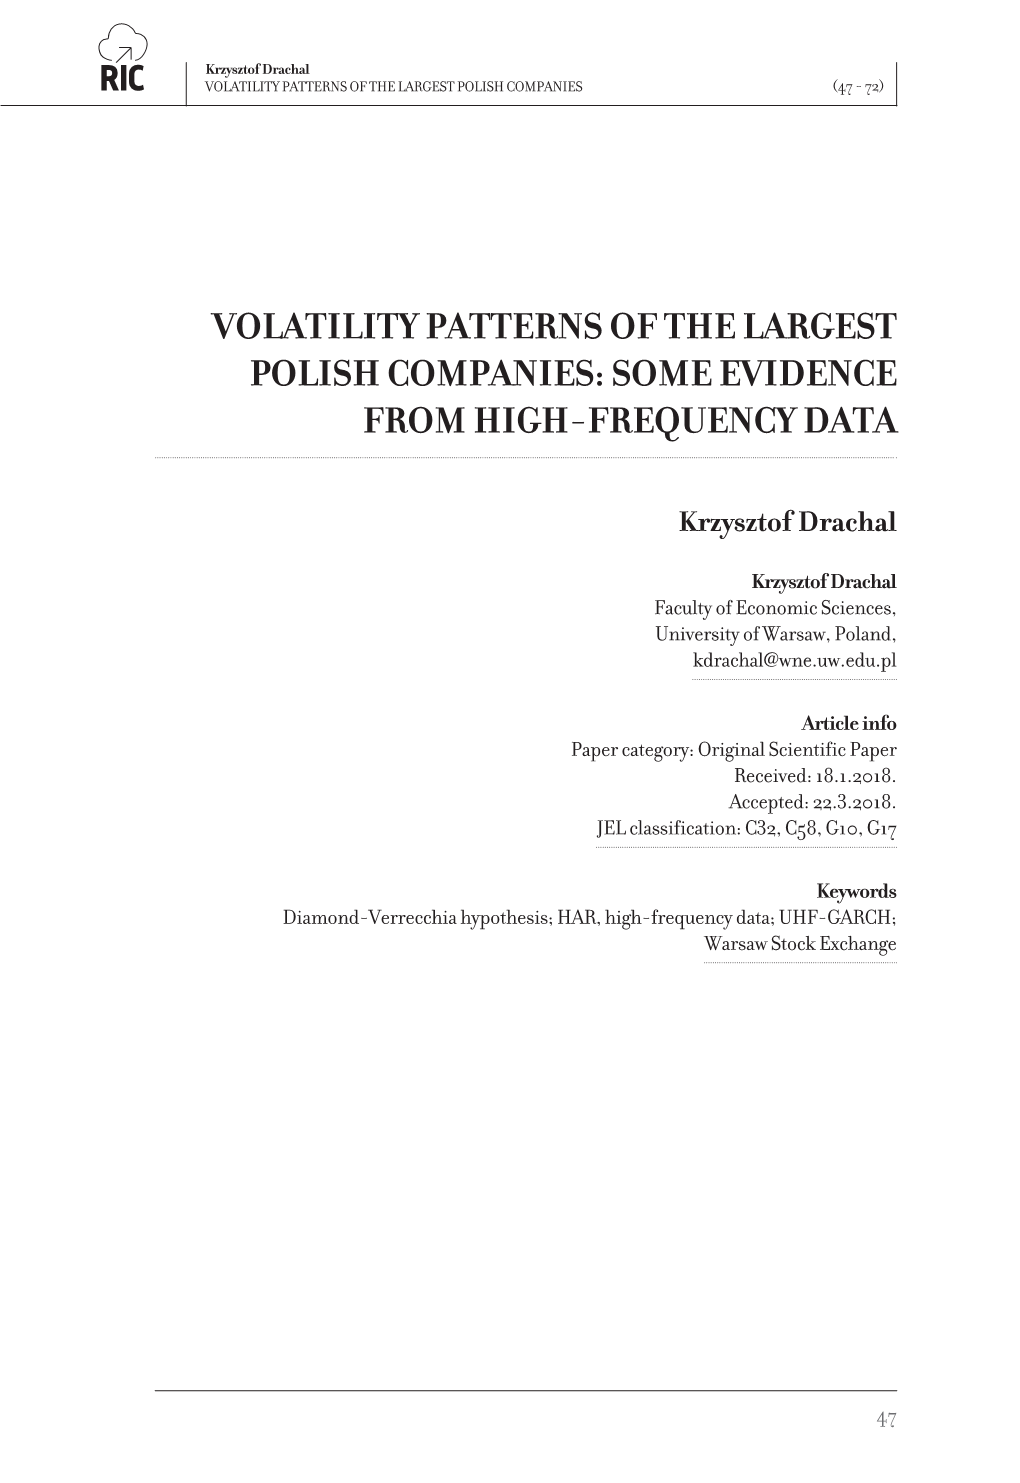 Volatility Patterns of the Largest Polish Companies (47 - 72)